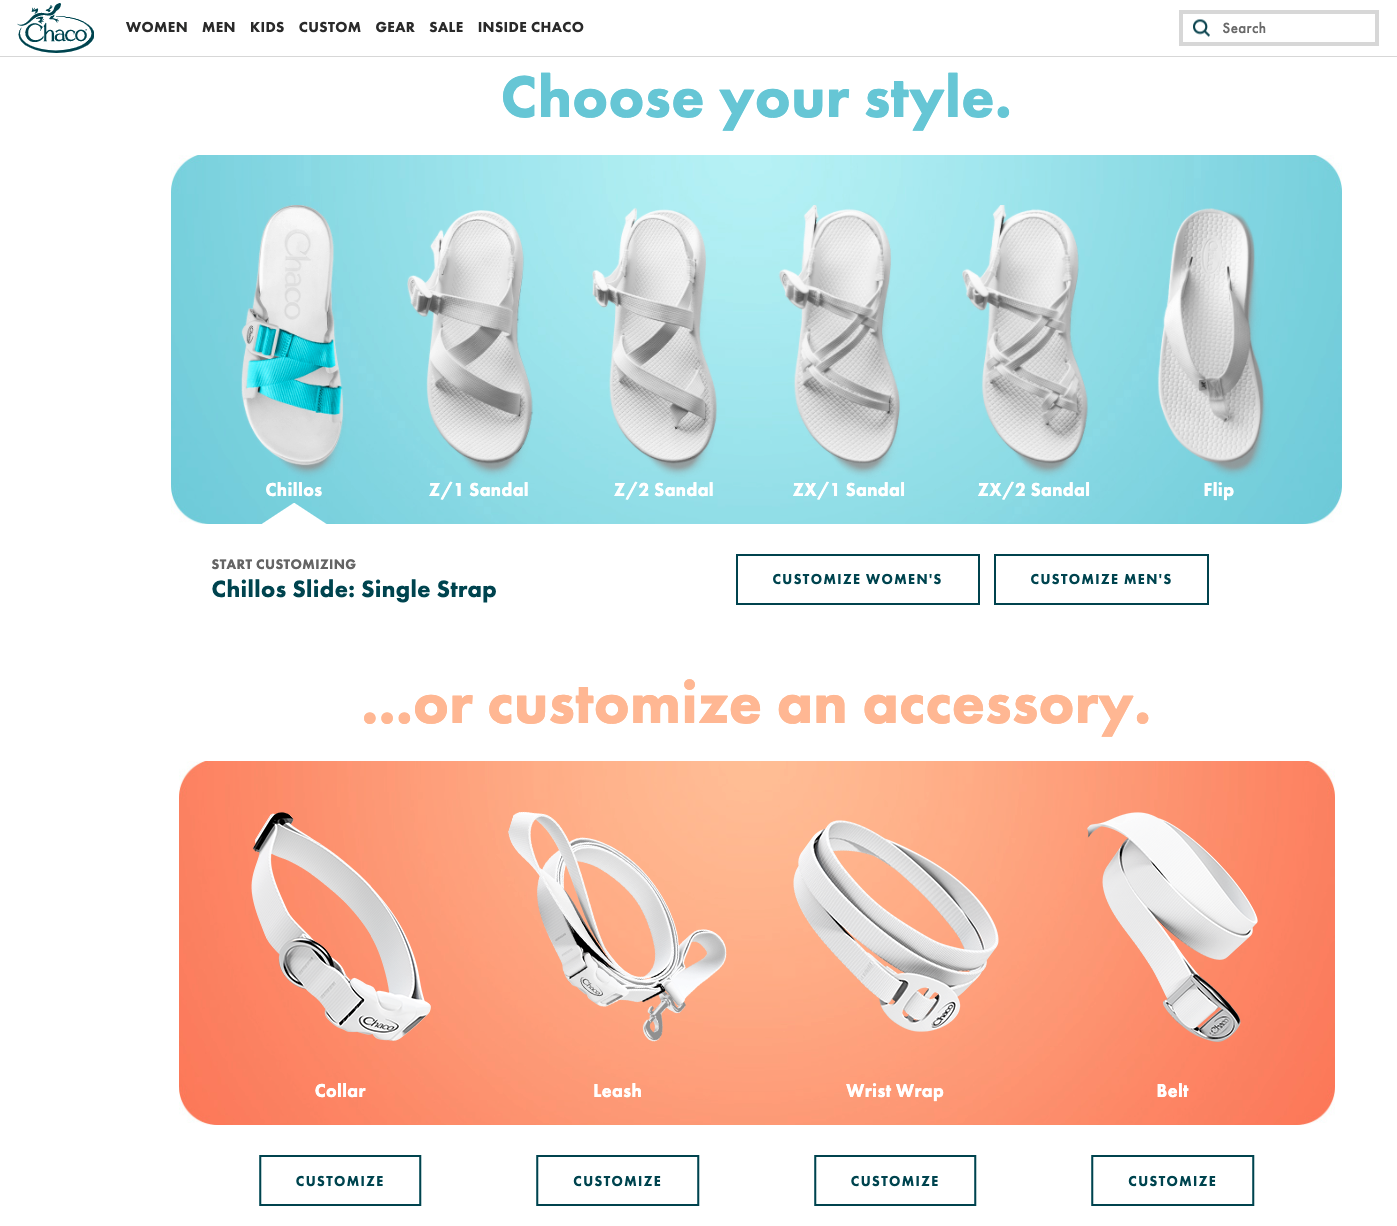 Chaco's product customization offering on their website